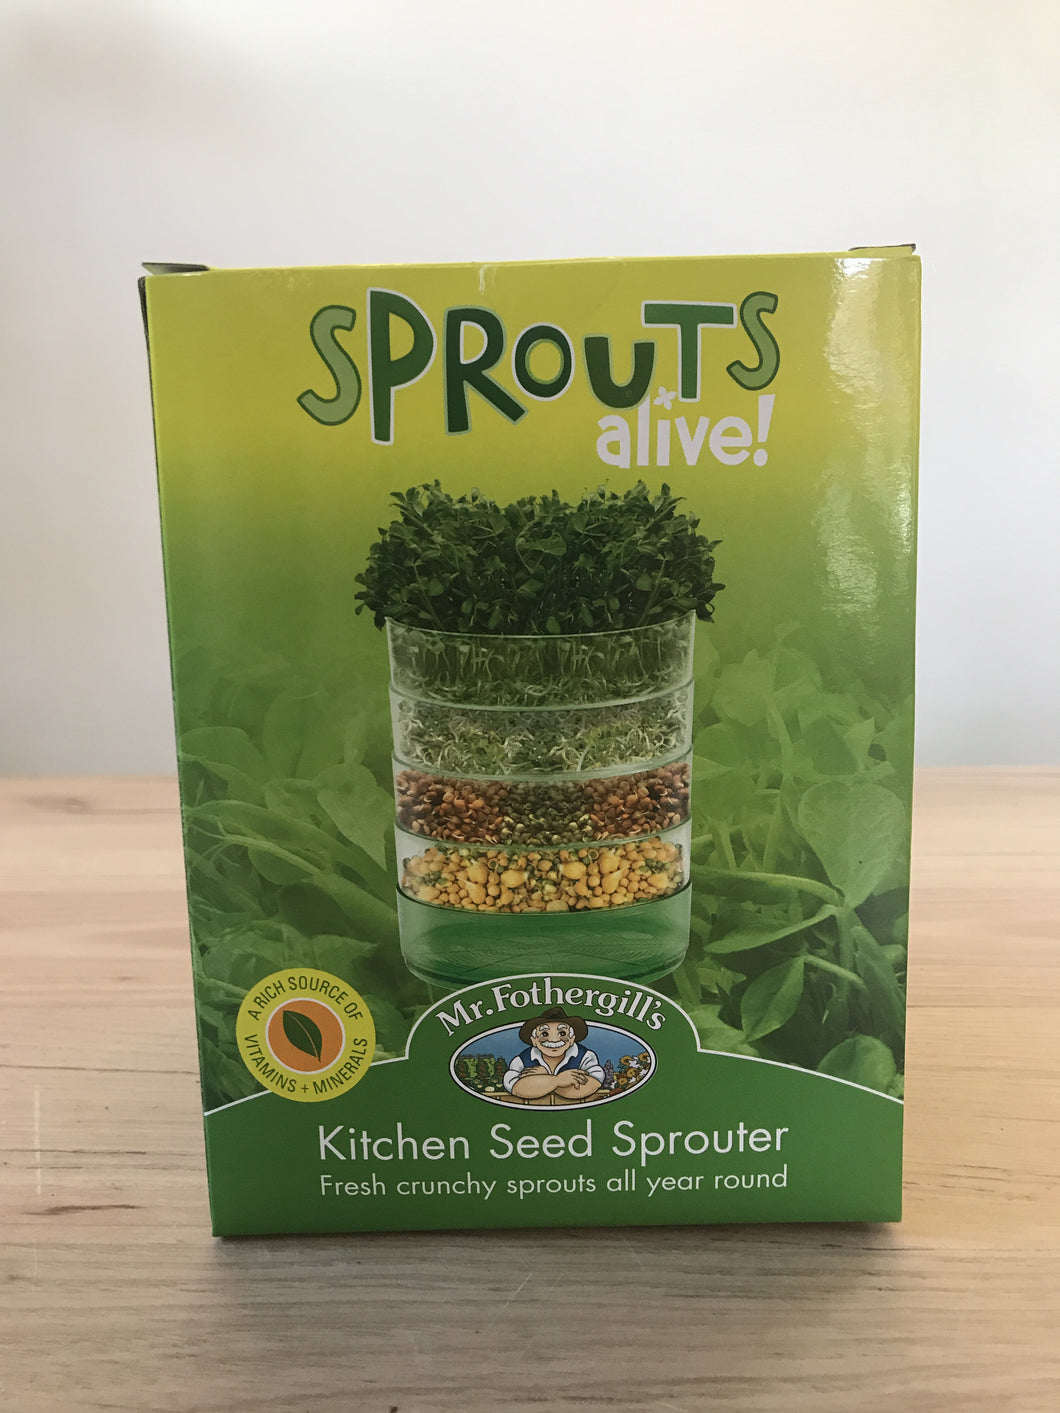 Sprouts Alive!